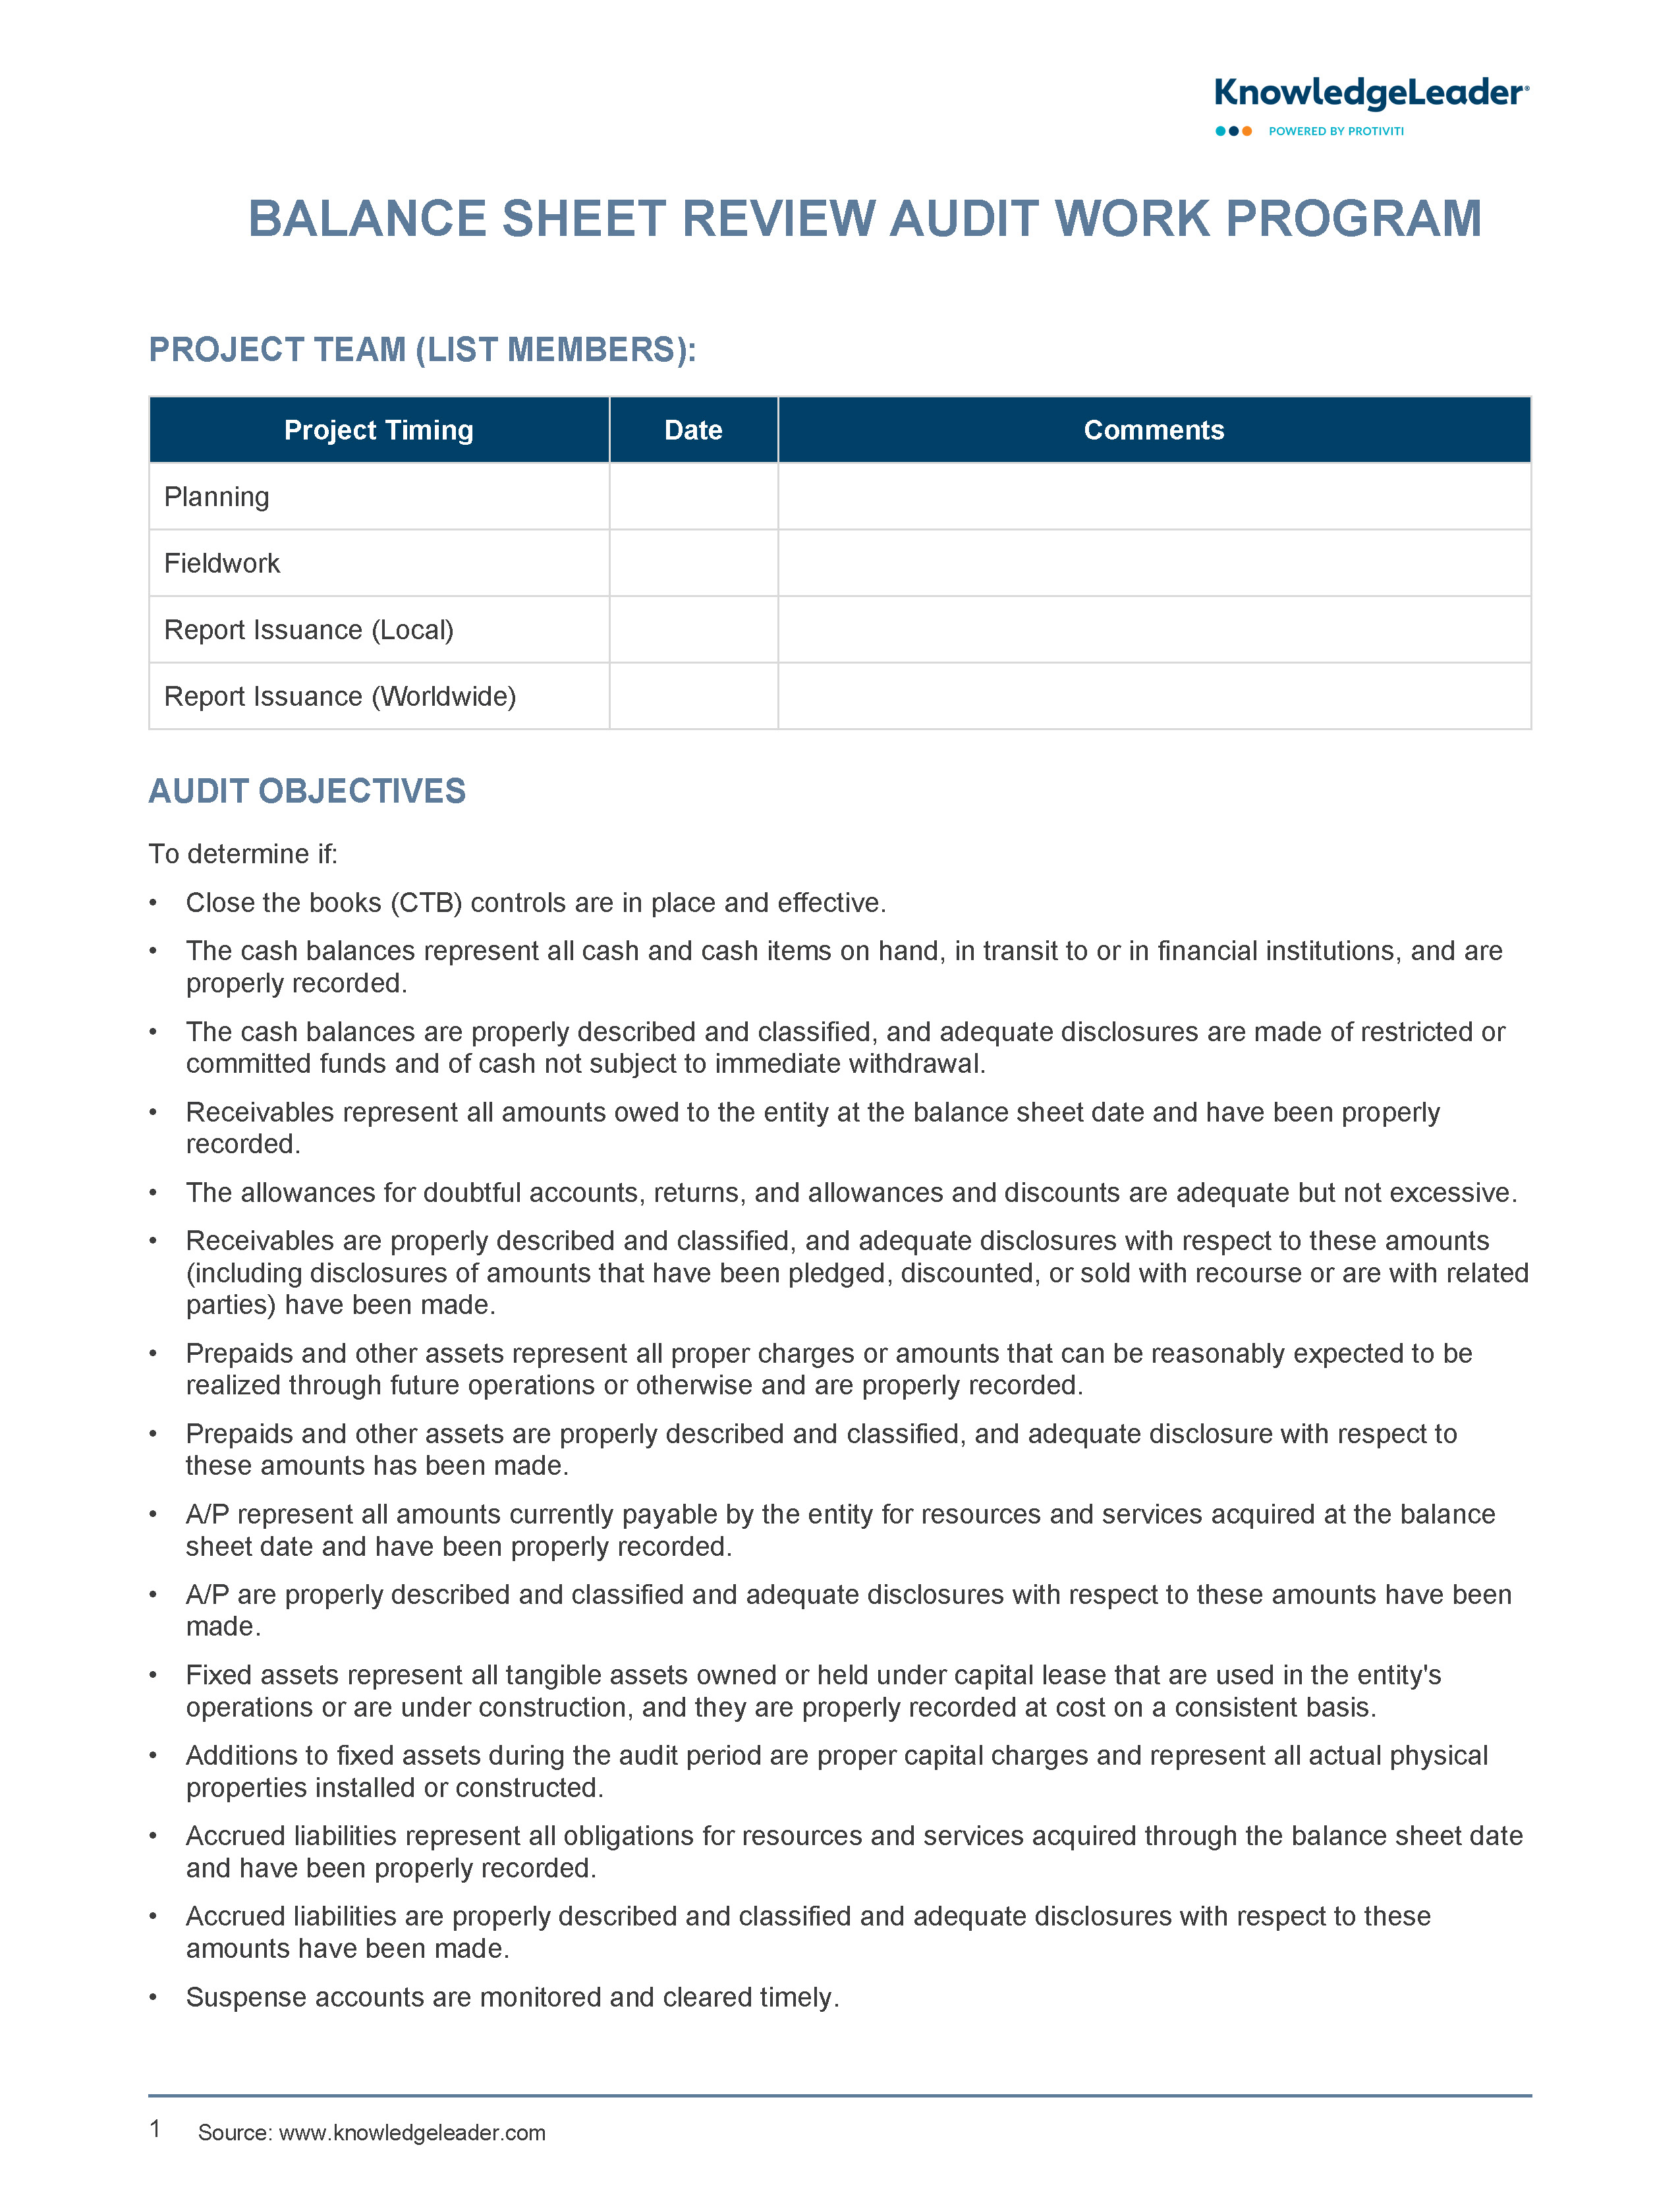 Screenshot of the first page of Balance Sheet Review Audit Work Program